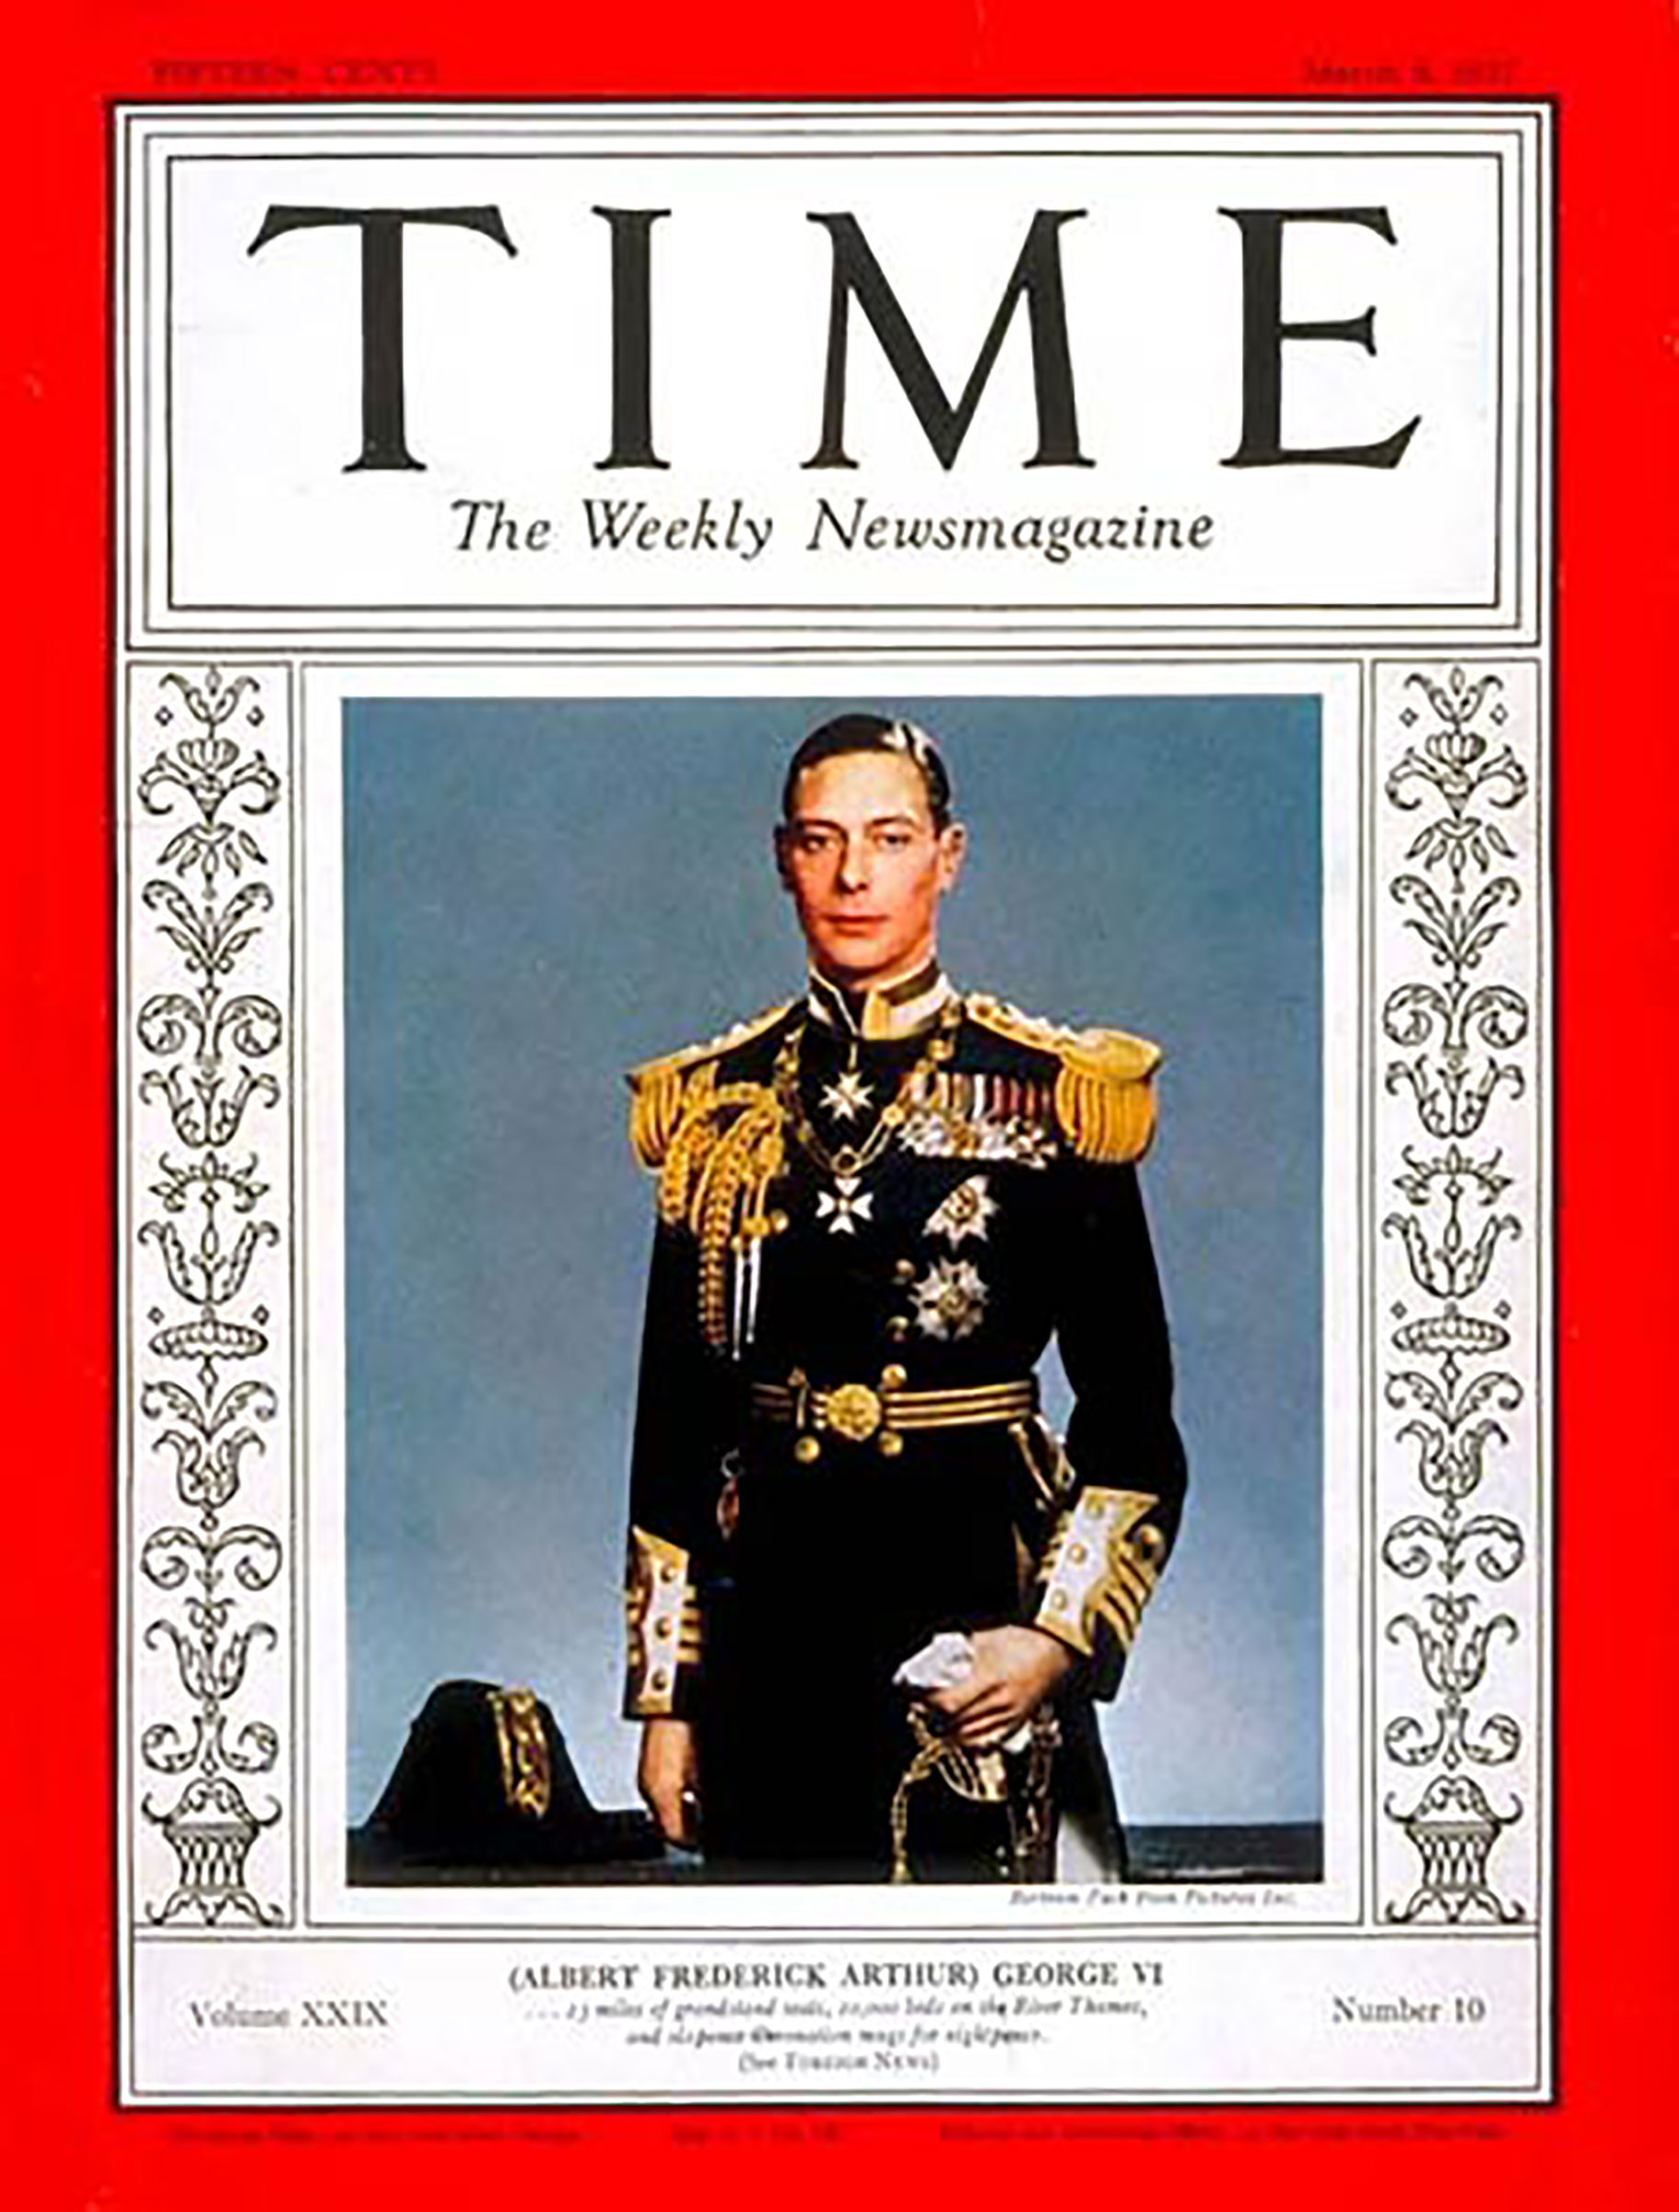 The Mar. 8, 1937 cover of TIME, showing George VI